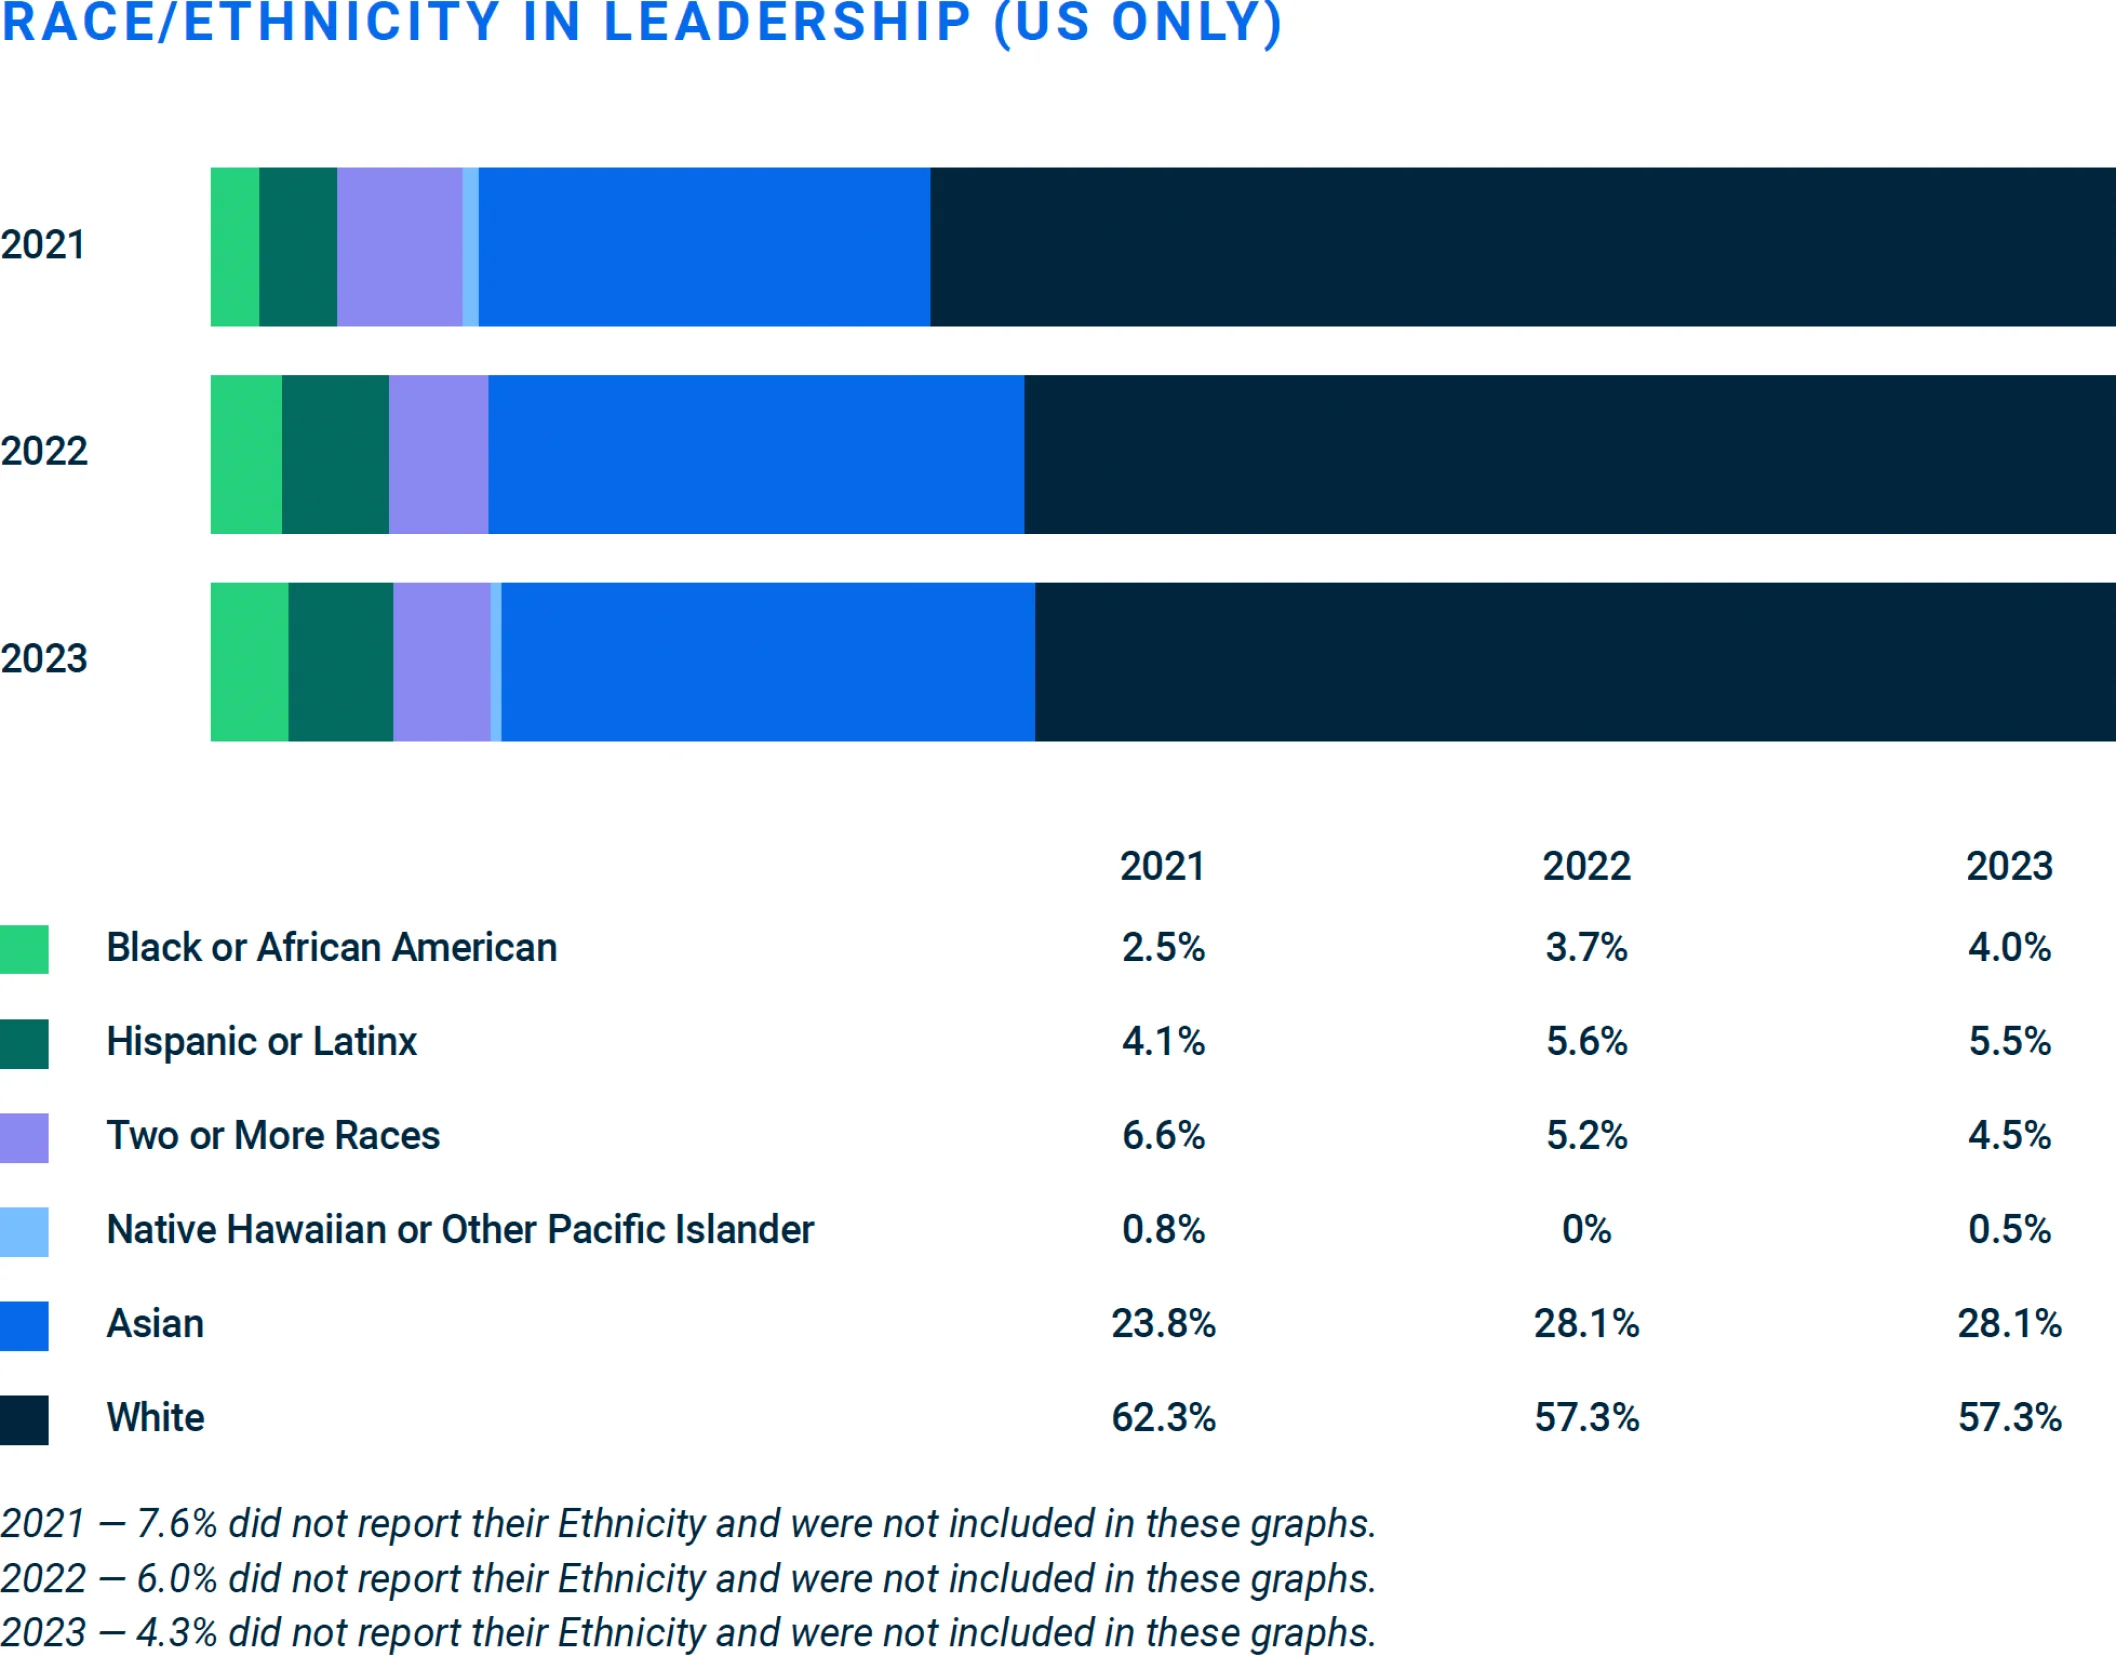 Race / Ethnicity in Leadership (US only)